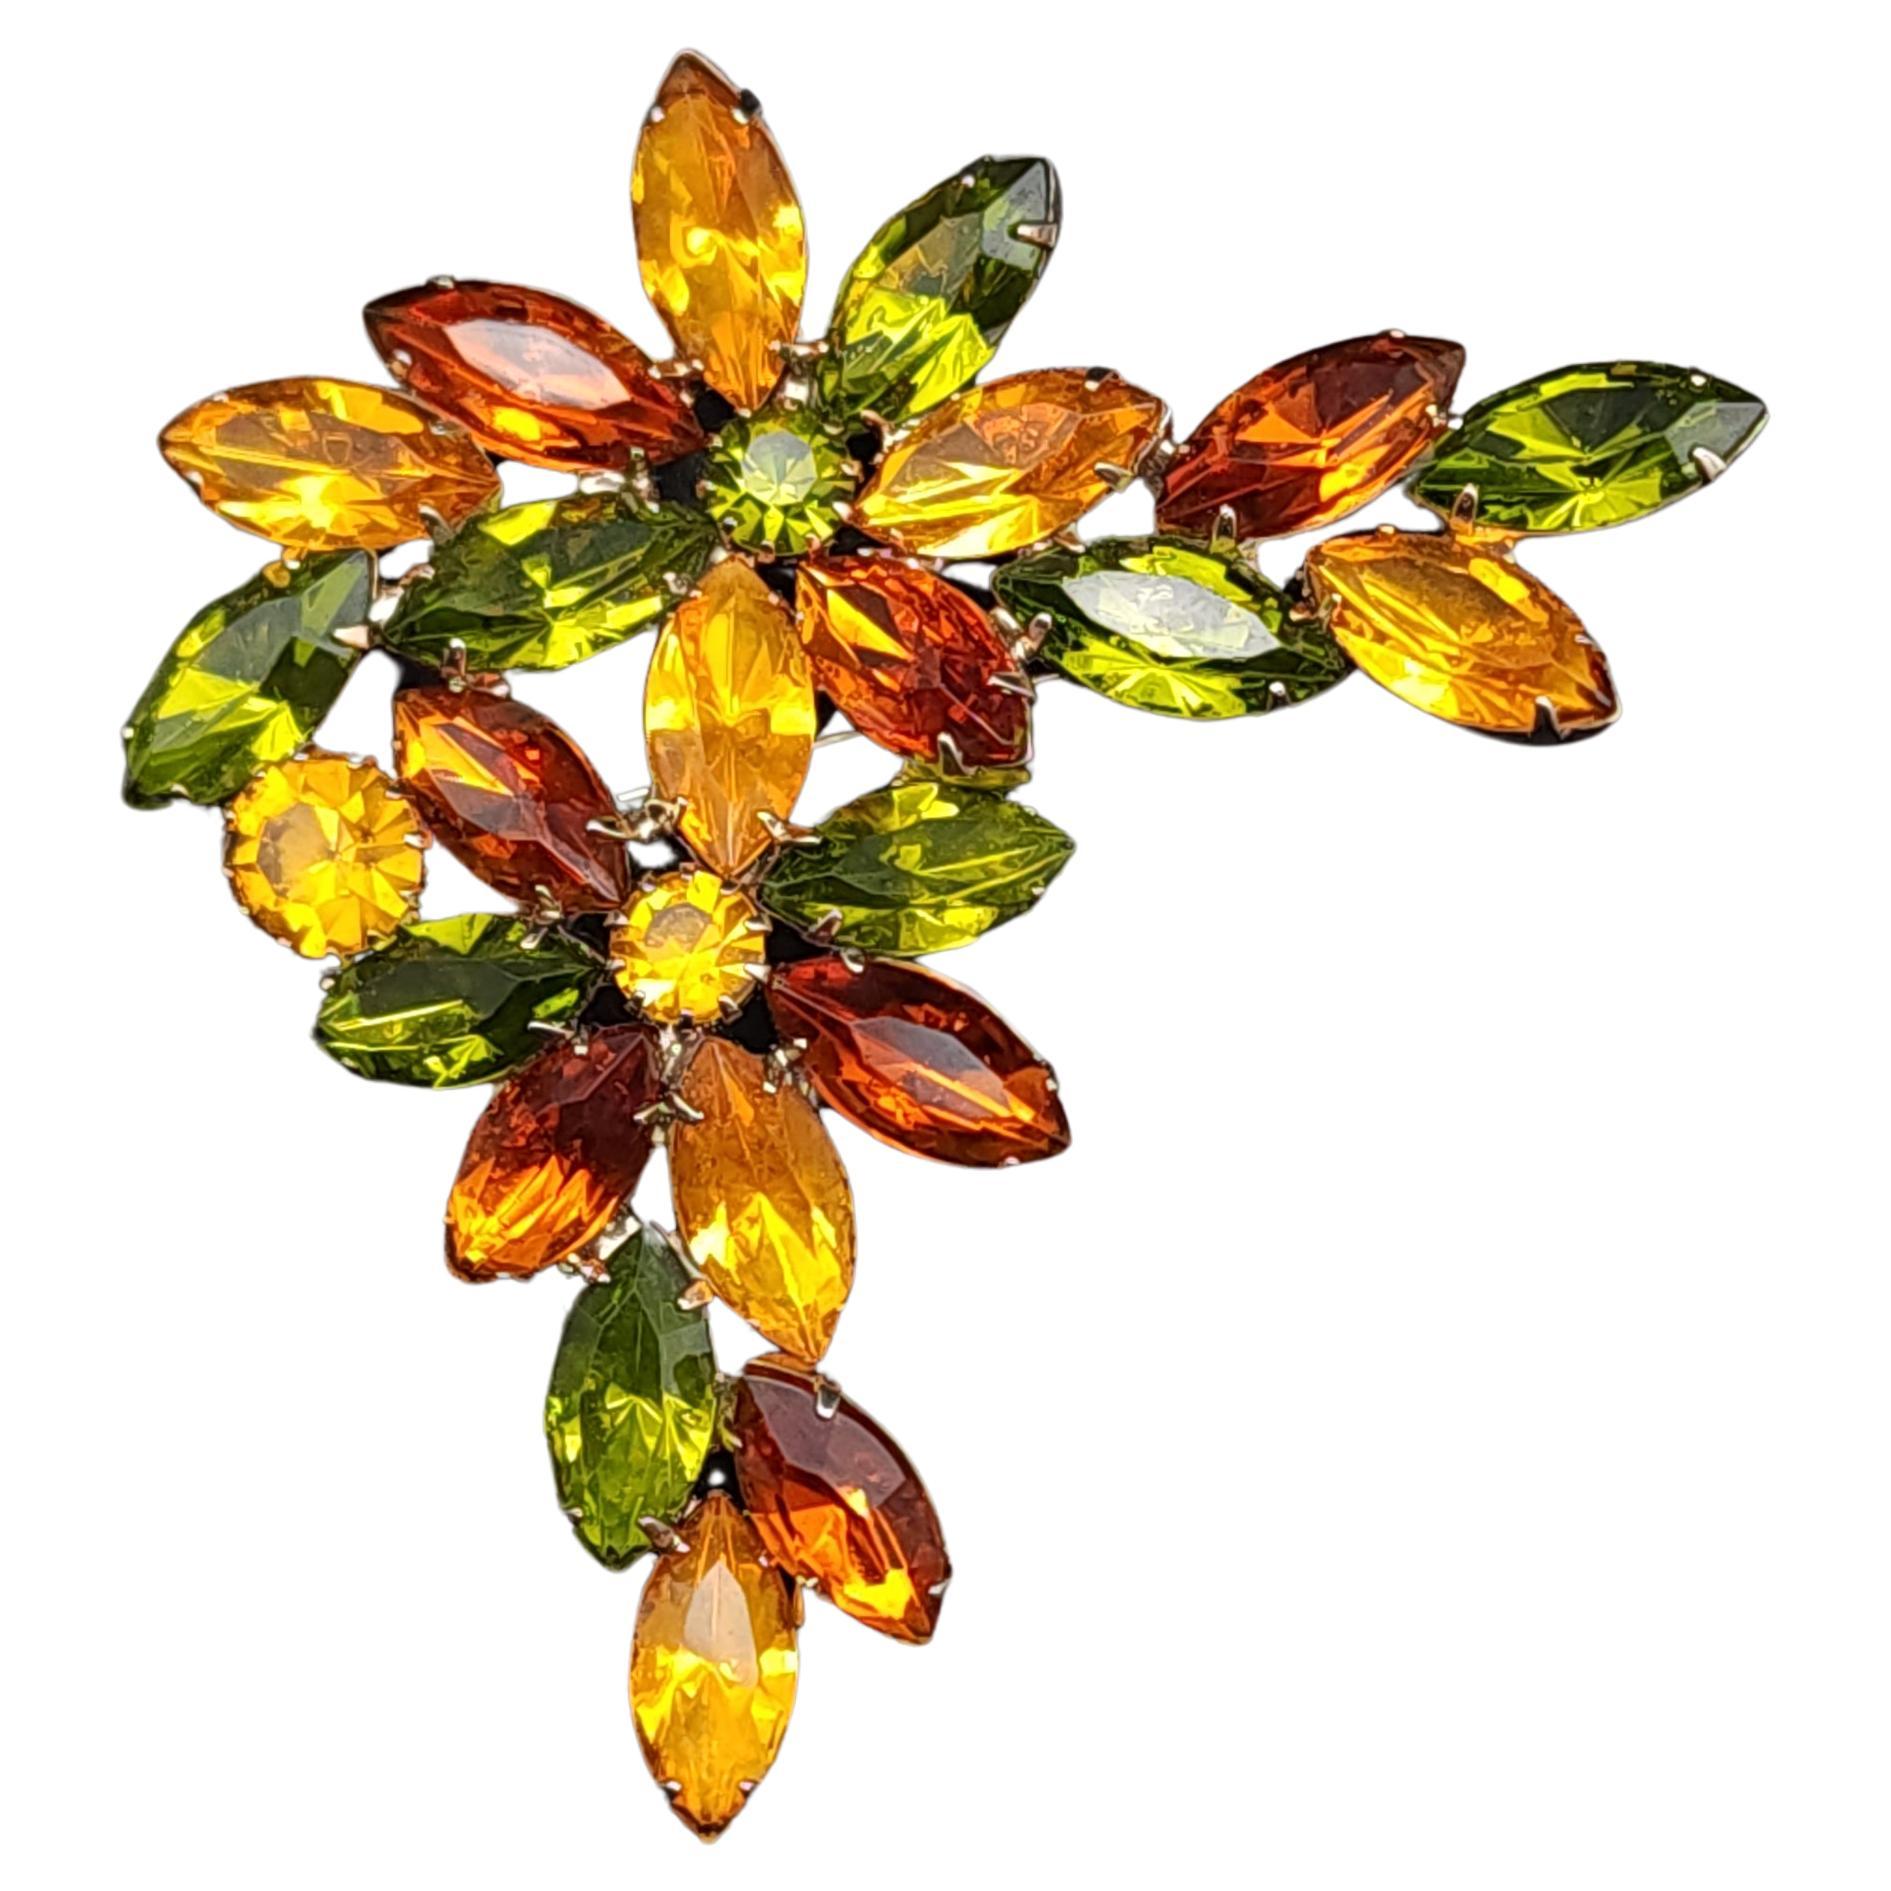 Vintage Floral Cluster Crystal Brooch Pin, Peridot and Citrine Crystal, Retro